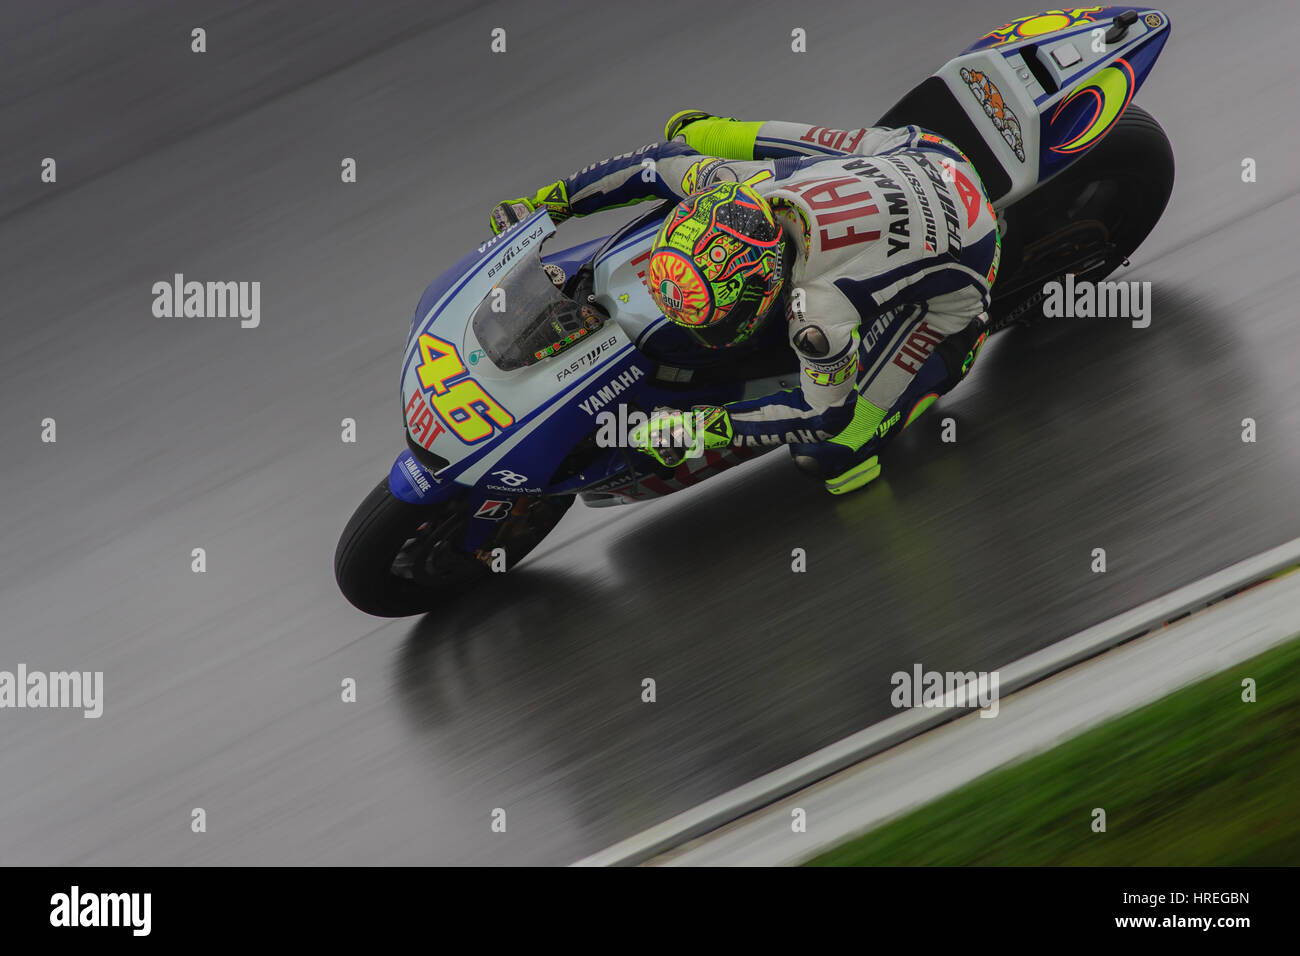 Valentino Rossi is a 9-time World Champion during the race in Sepang  International Circuits Stock Photo - Alamy